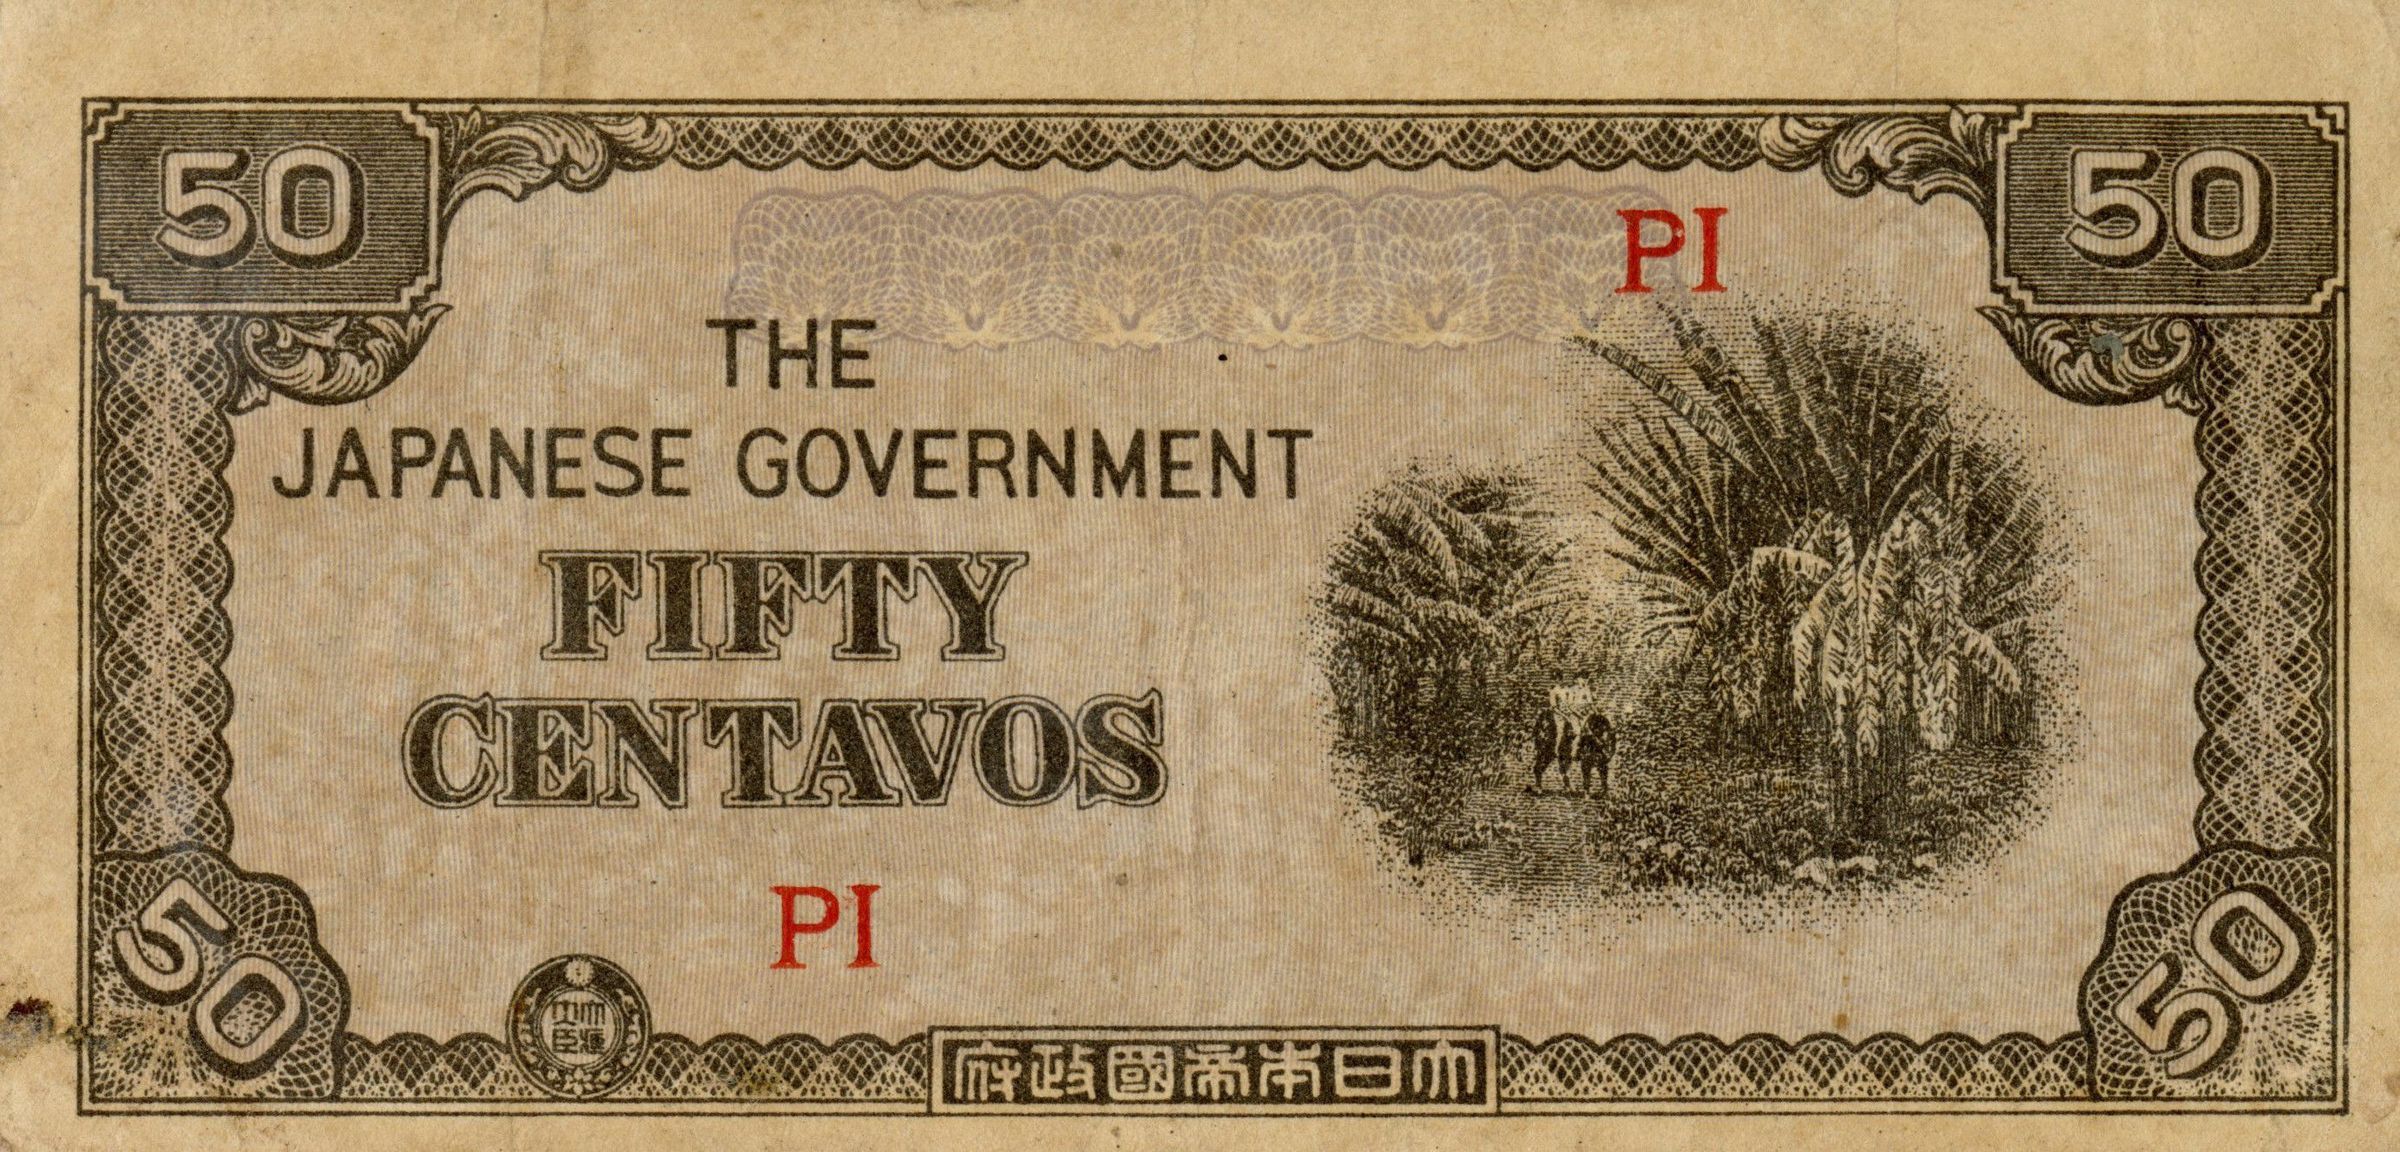 Primary Image of Fifty Centavos Note